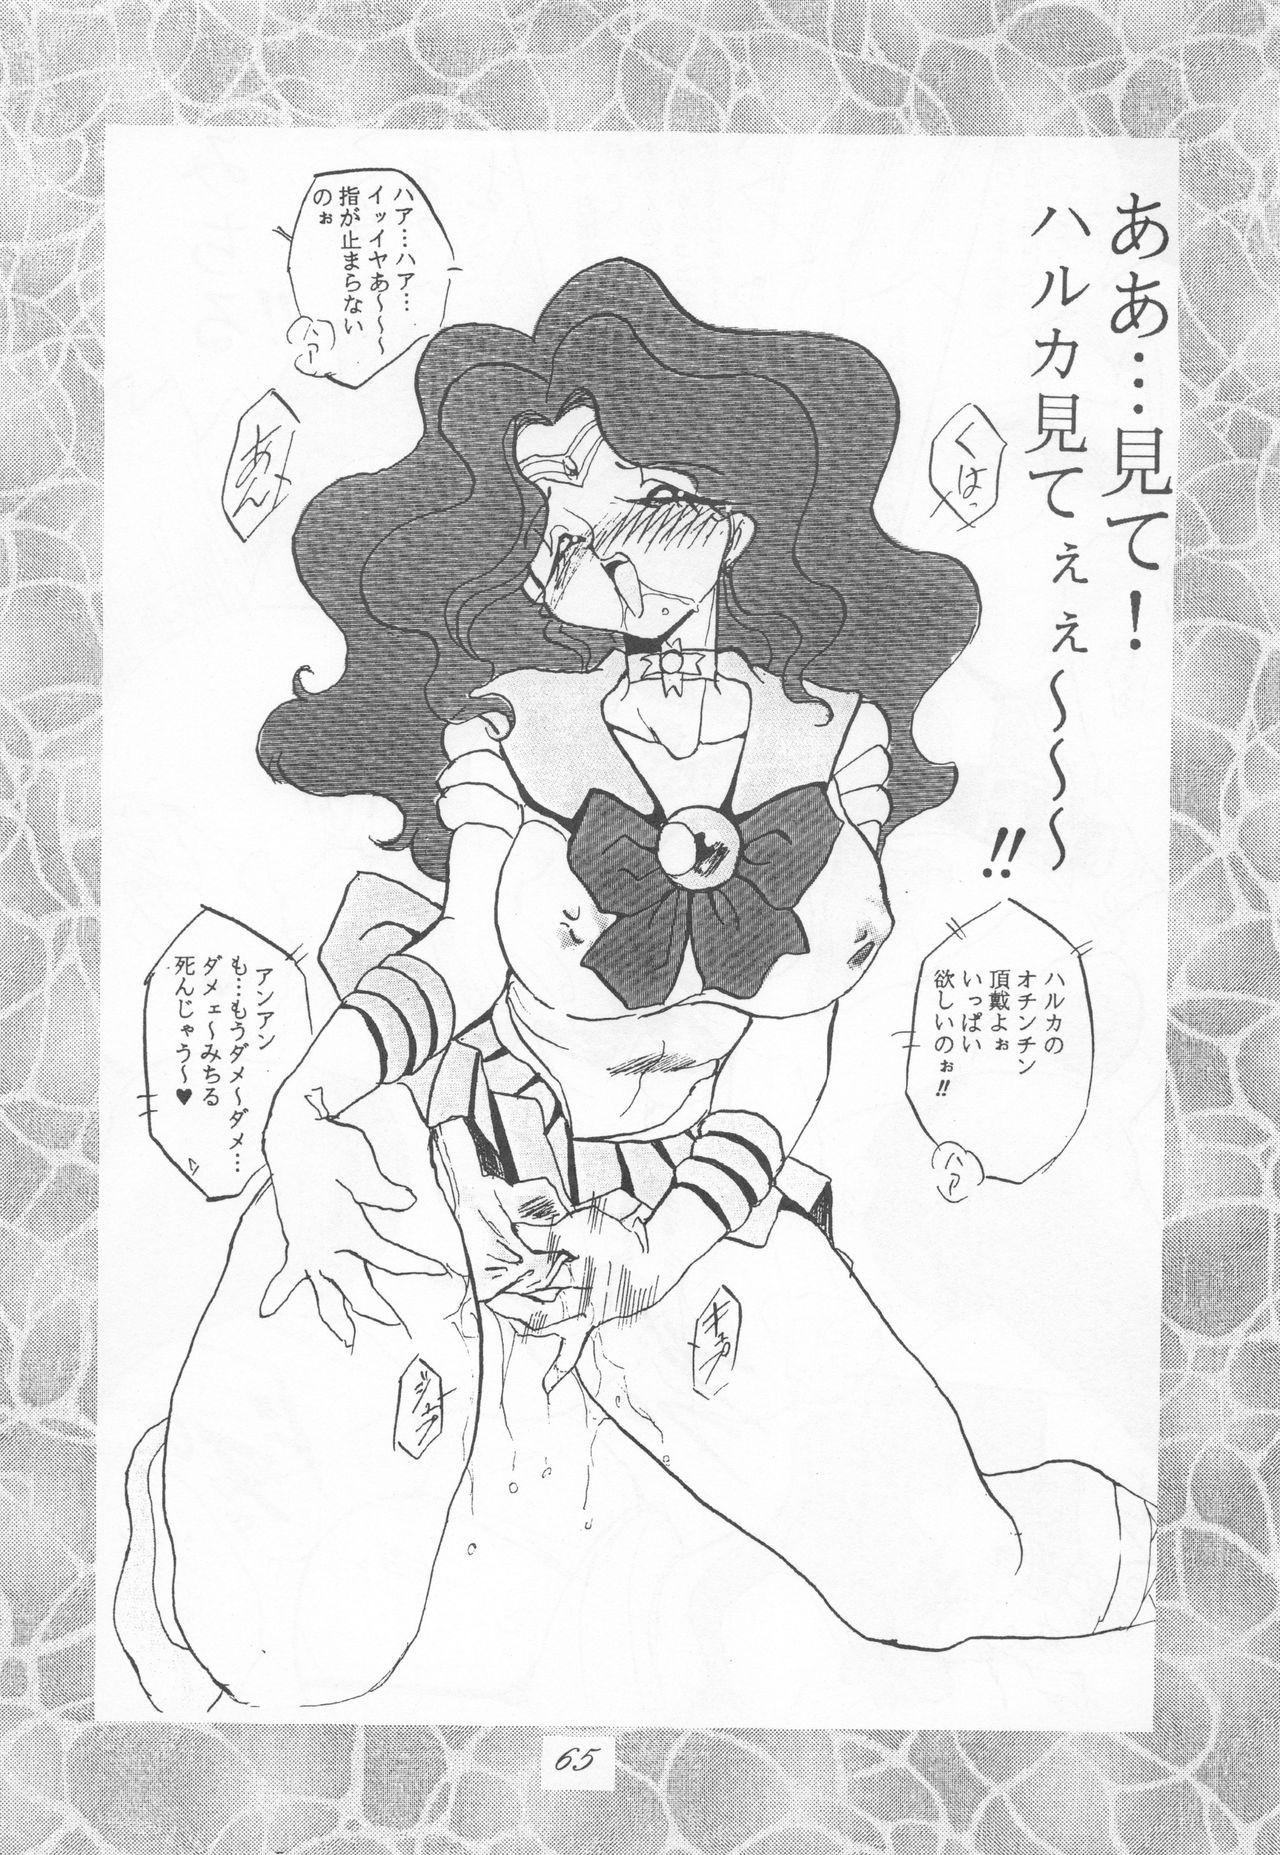 Sailor Moon 1 Page Gekijou P2 - SAILOR MOON ONE PAGE THEATER II 64